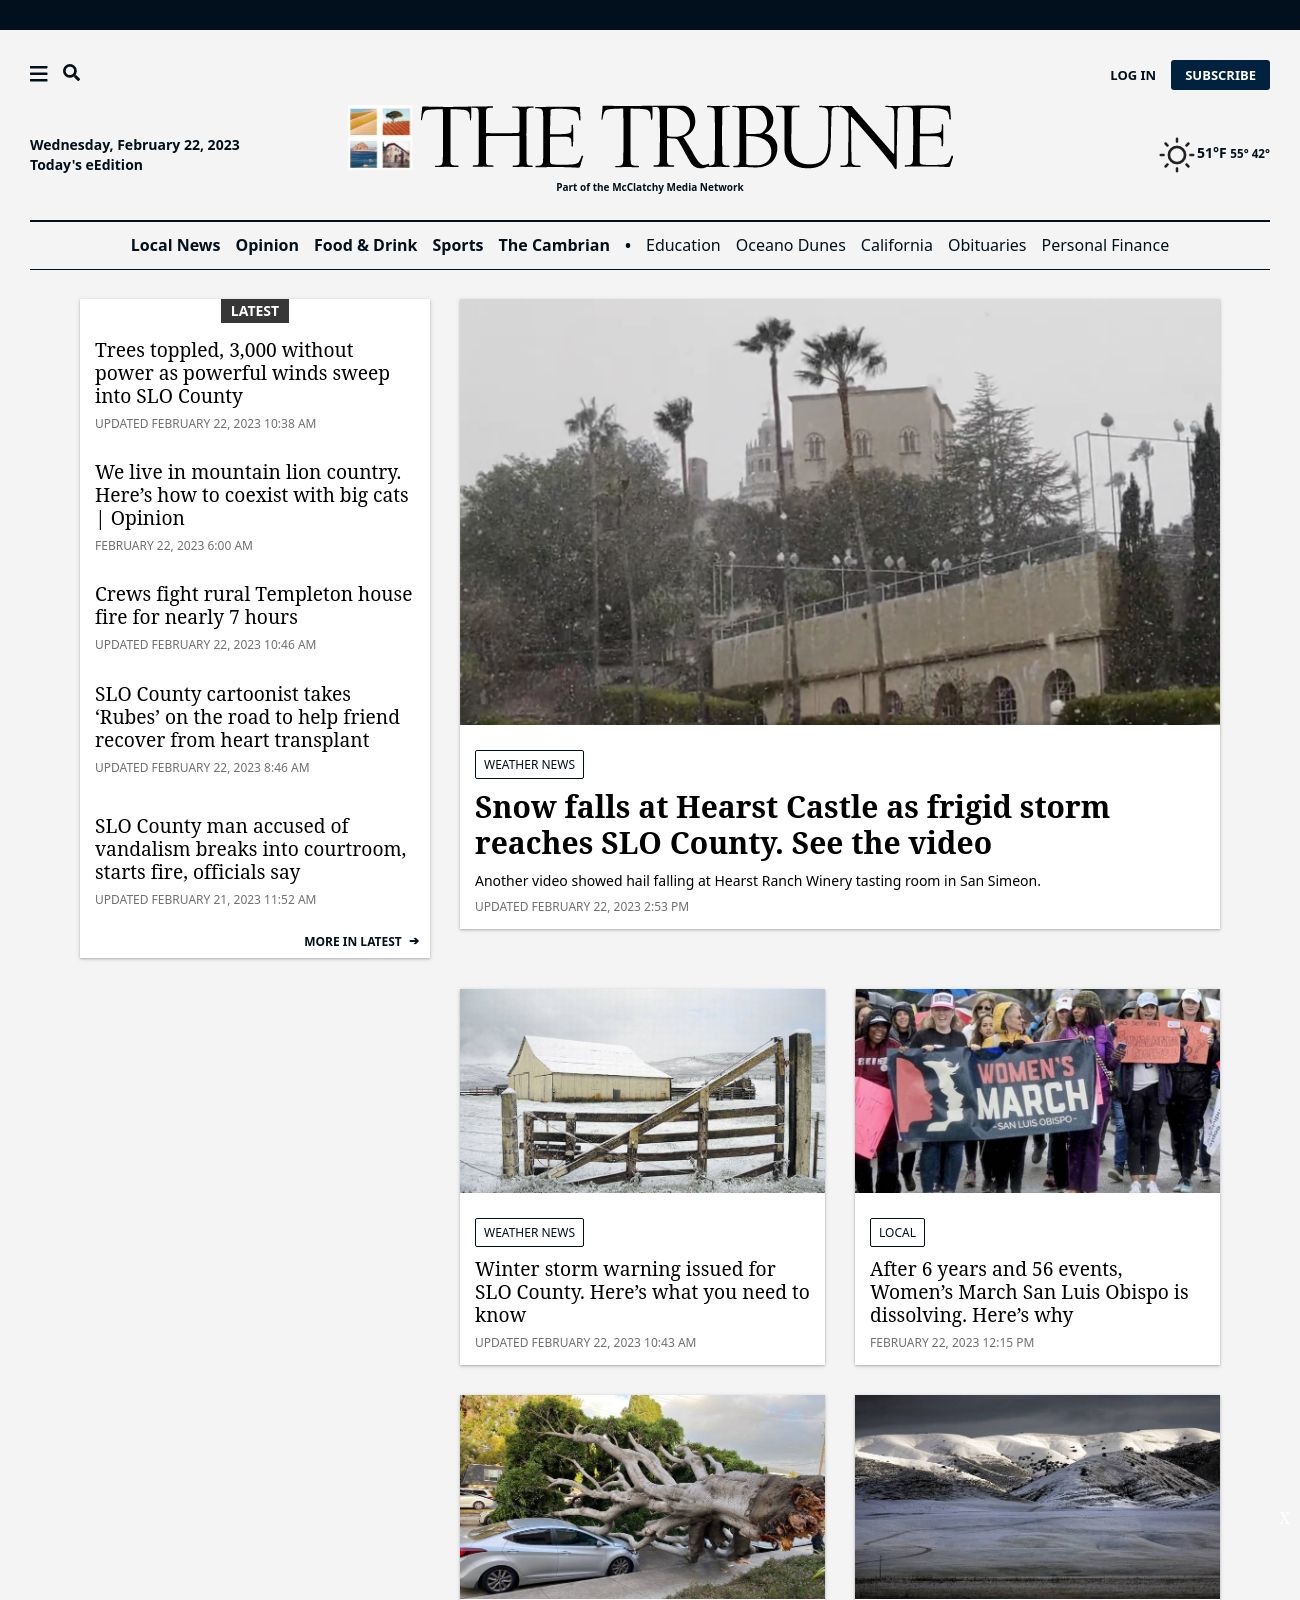 The Tribune at 2023-02-22 15:58:03-08:00 local time